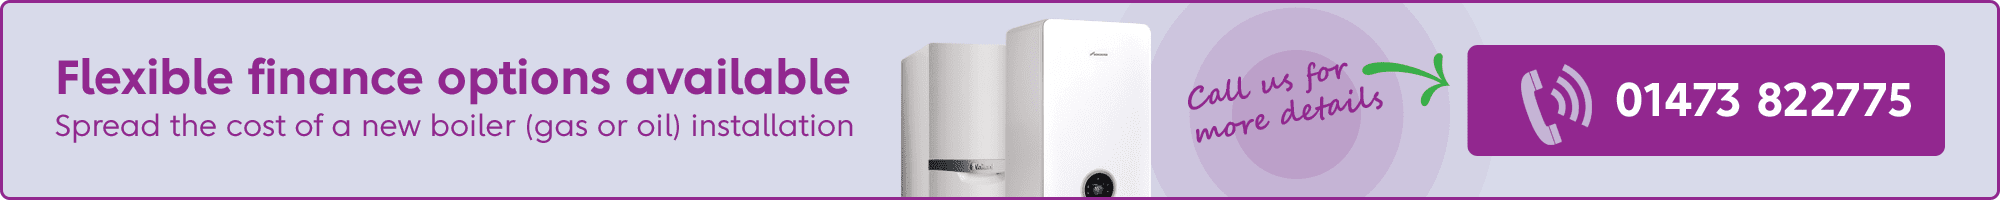 Finance options available for boiler installations